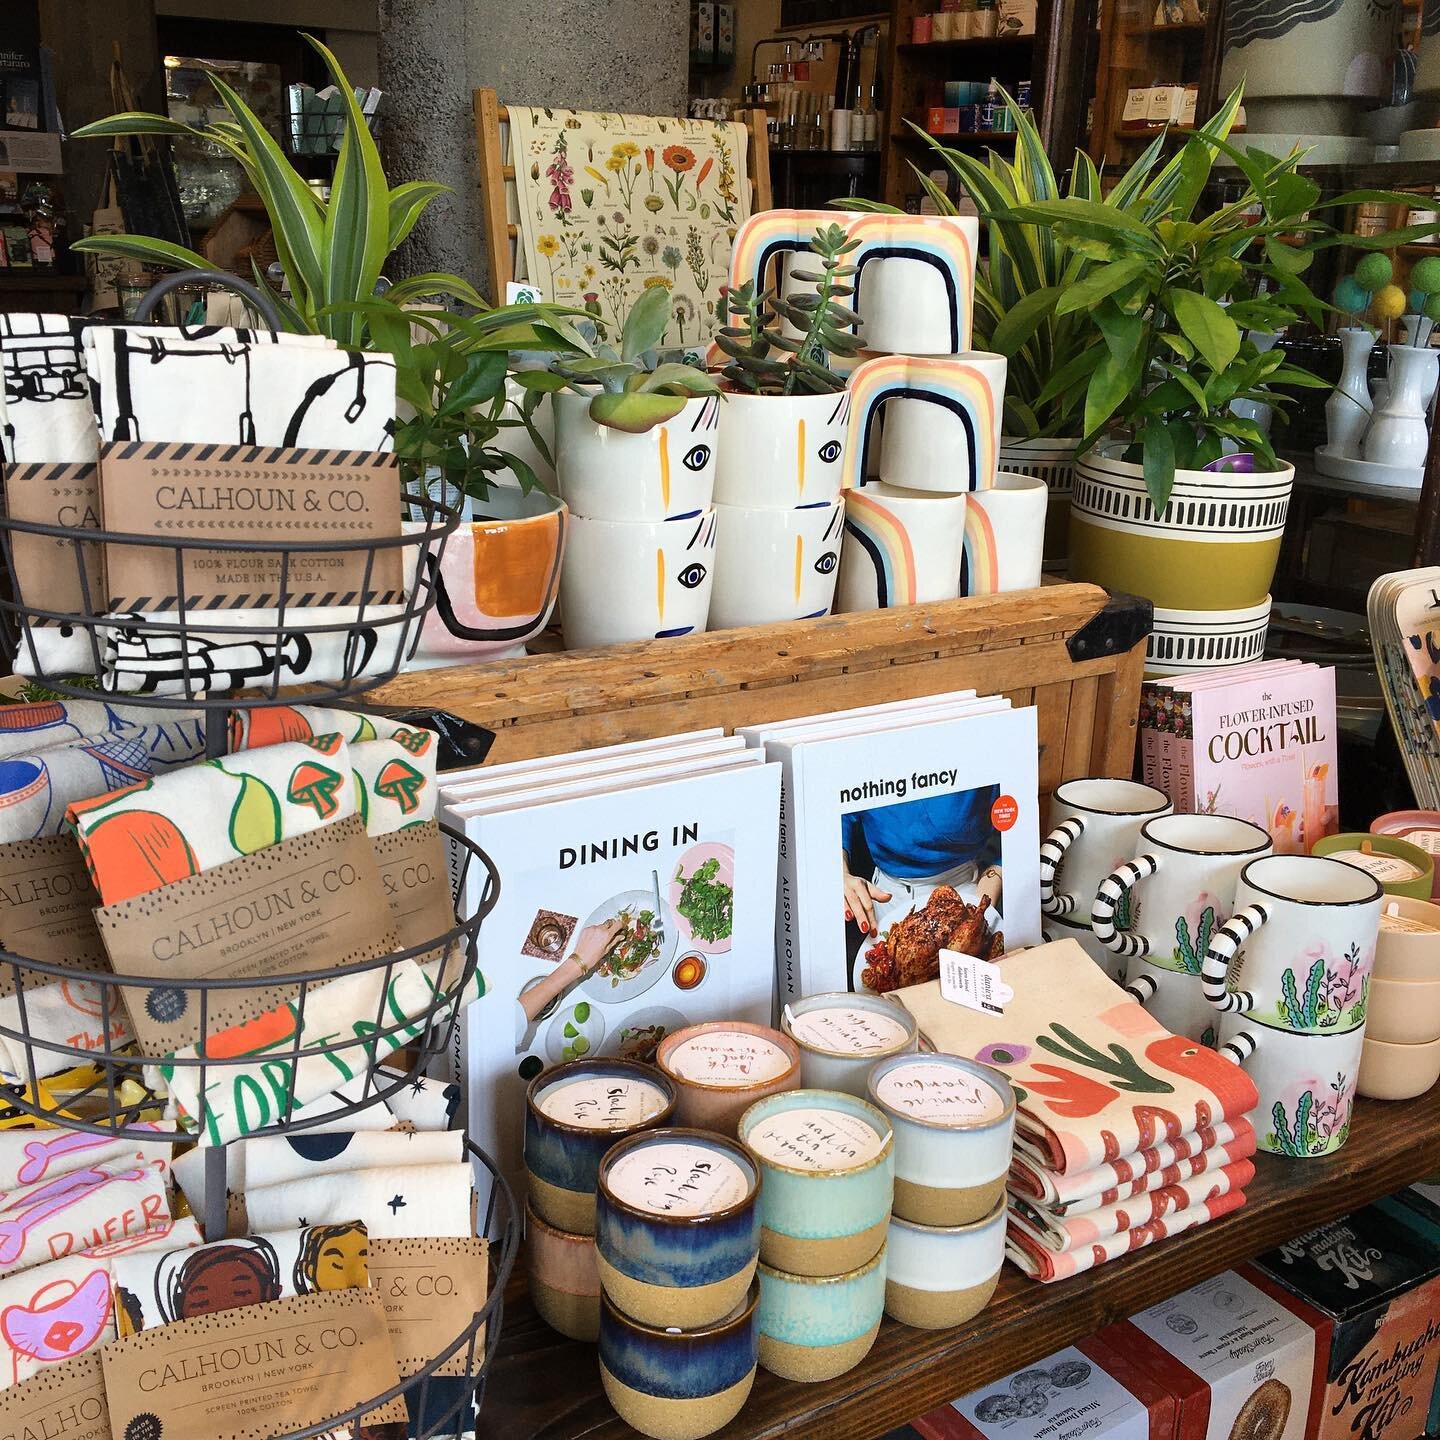 We have lots of new things in the shop! Stop on by, we are open 11-7 today 💛 #nestdetroit #homegoods #decor #candles #plants #gifts